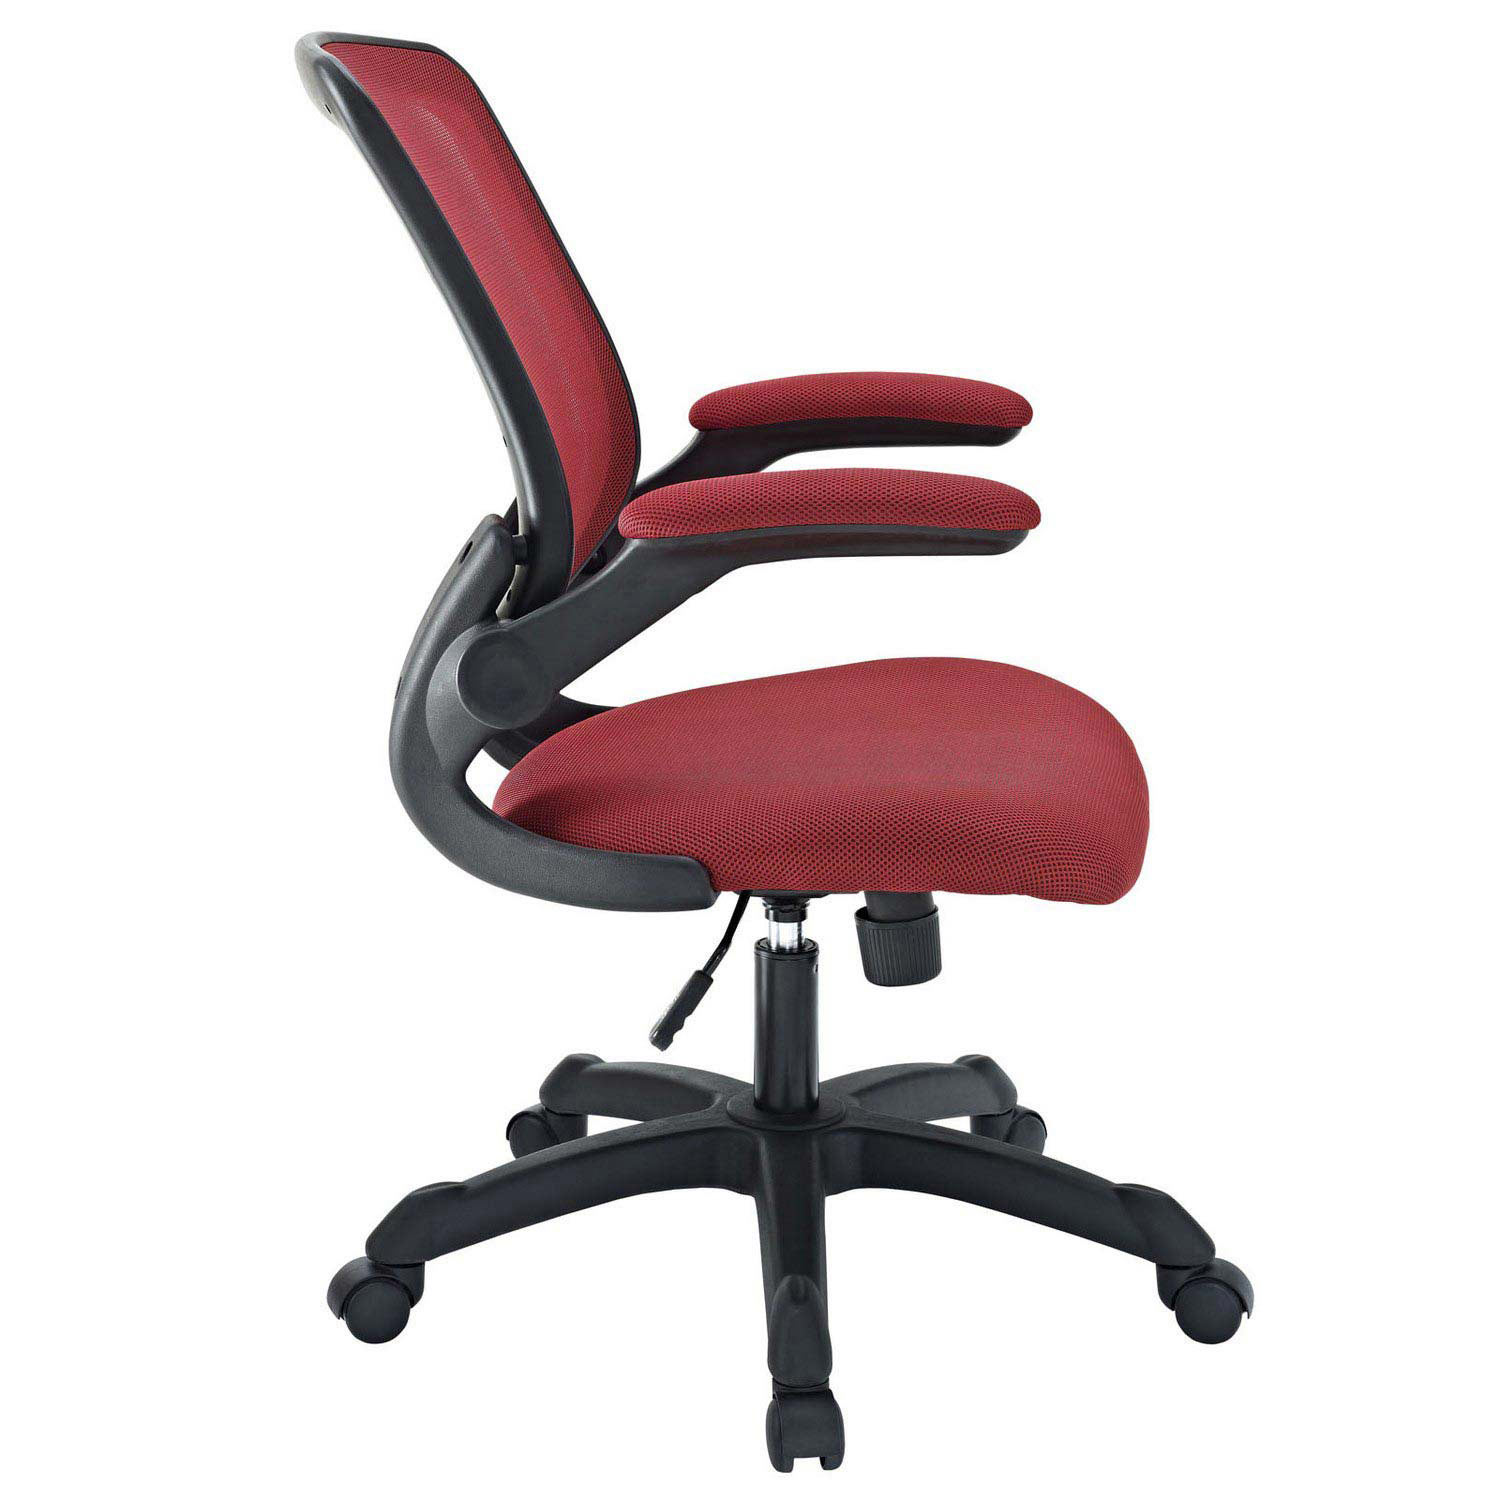 Modway Veer Mesh Office Chair - Red